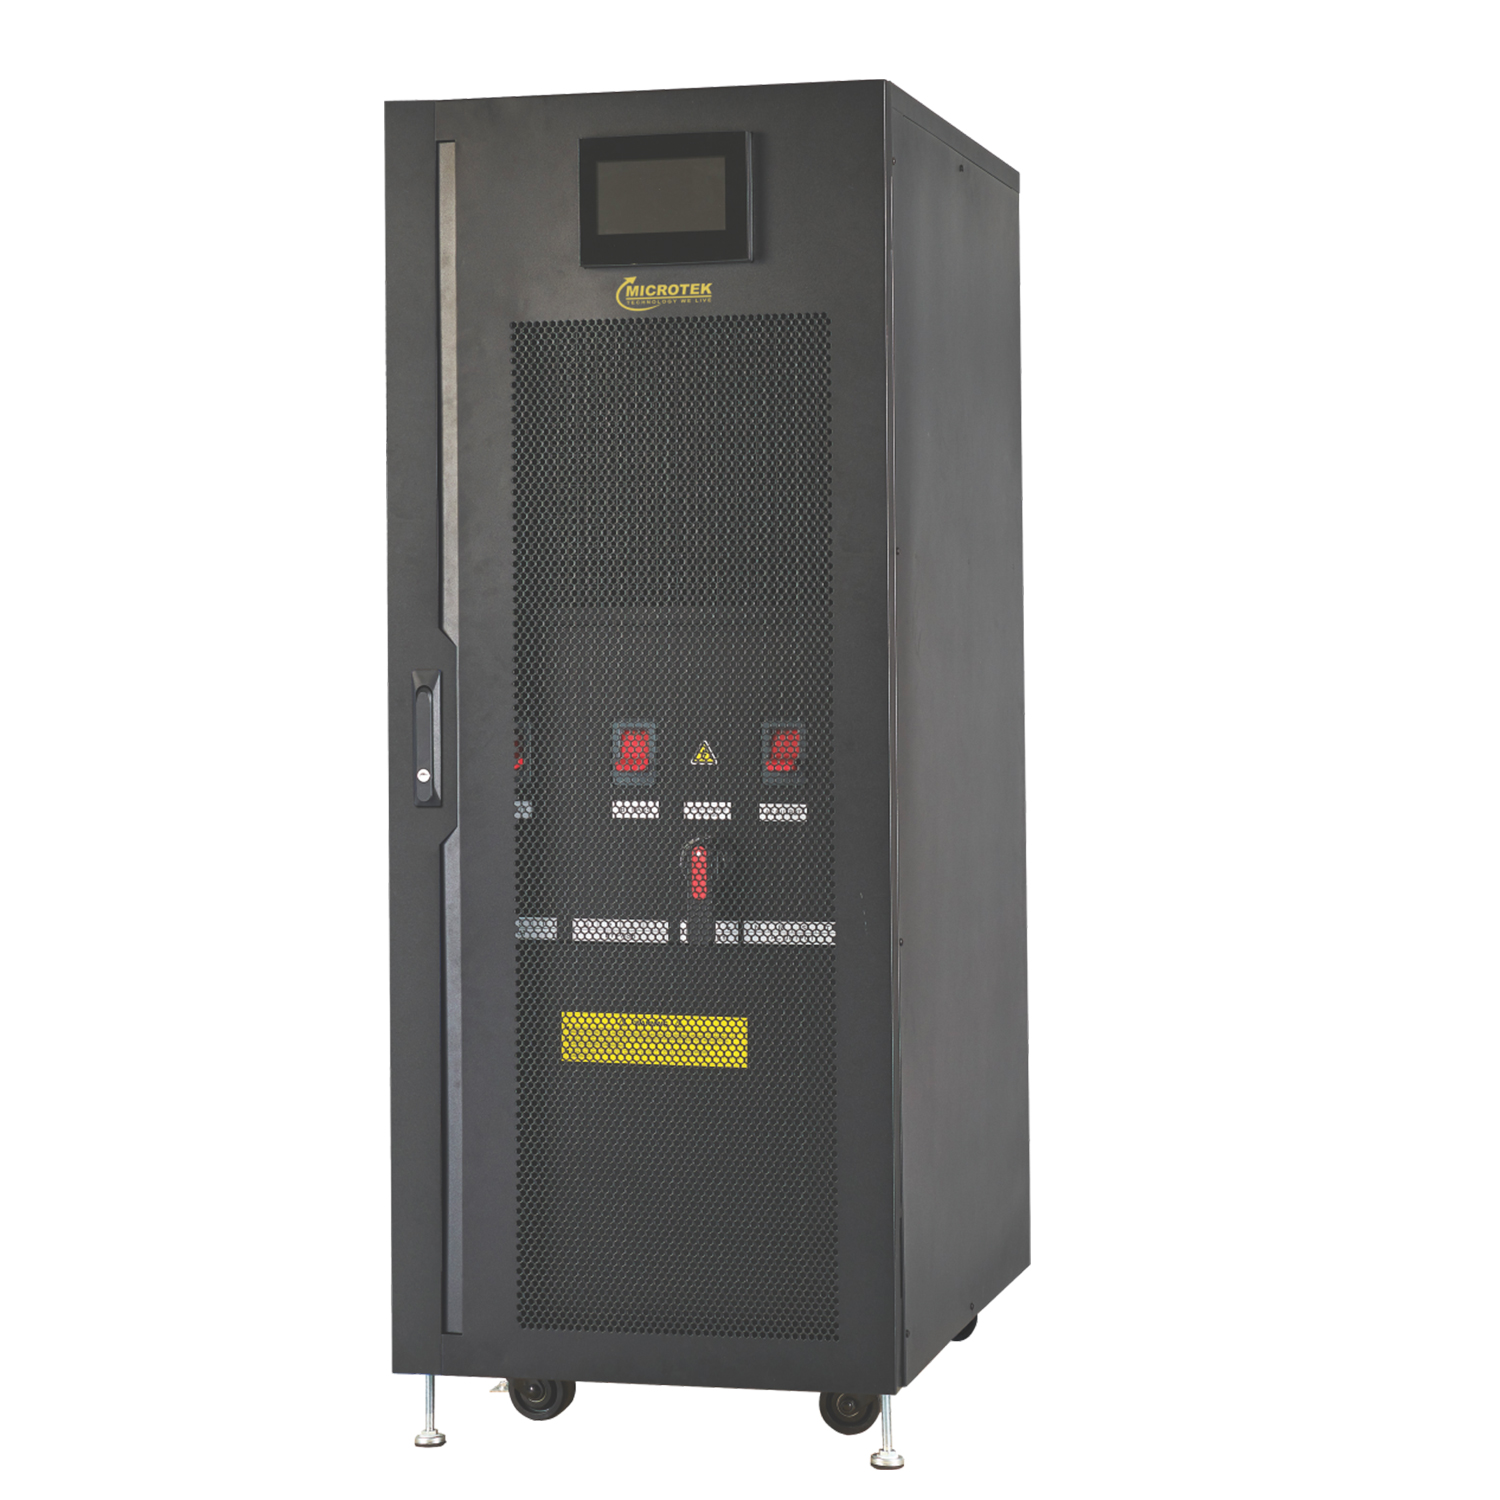 HF SUPERMAX+ 100KVA, 3PH:3PH, ±240V(40-Battery System), DUAL INPUT, 7 INCH TOUCH PANEL LCD DISPLAY